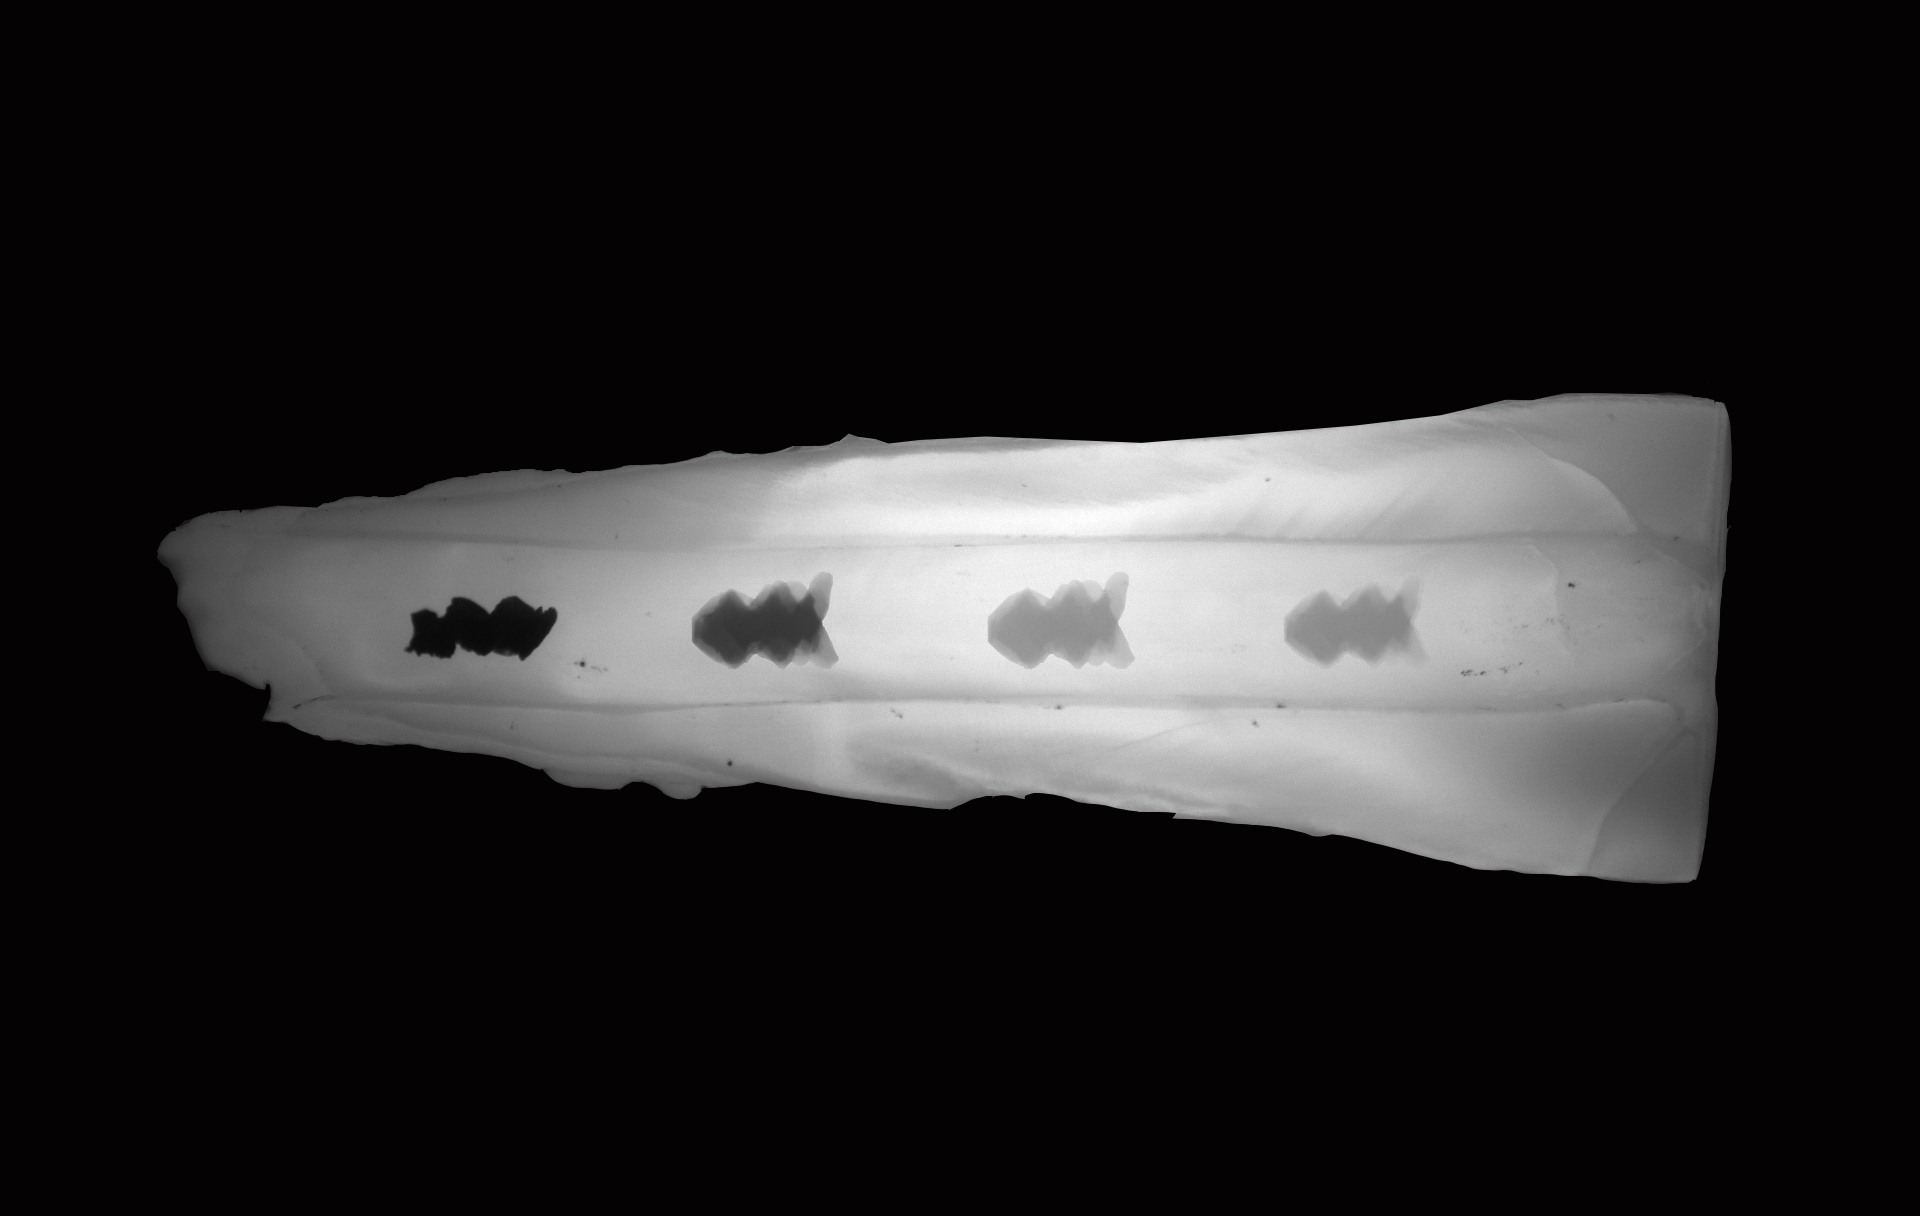 A time-lapse image of a tooth with a helicoid robot moving through the internal tooth canal.